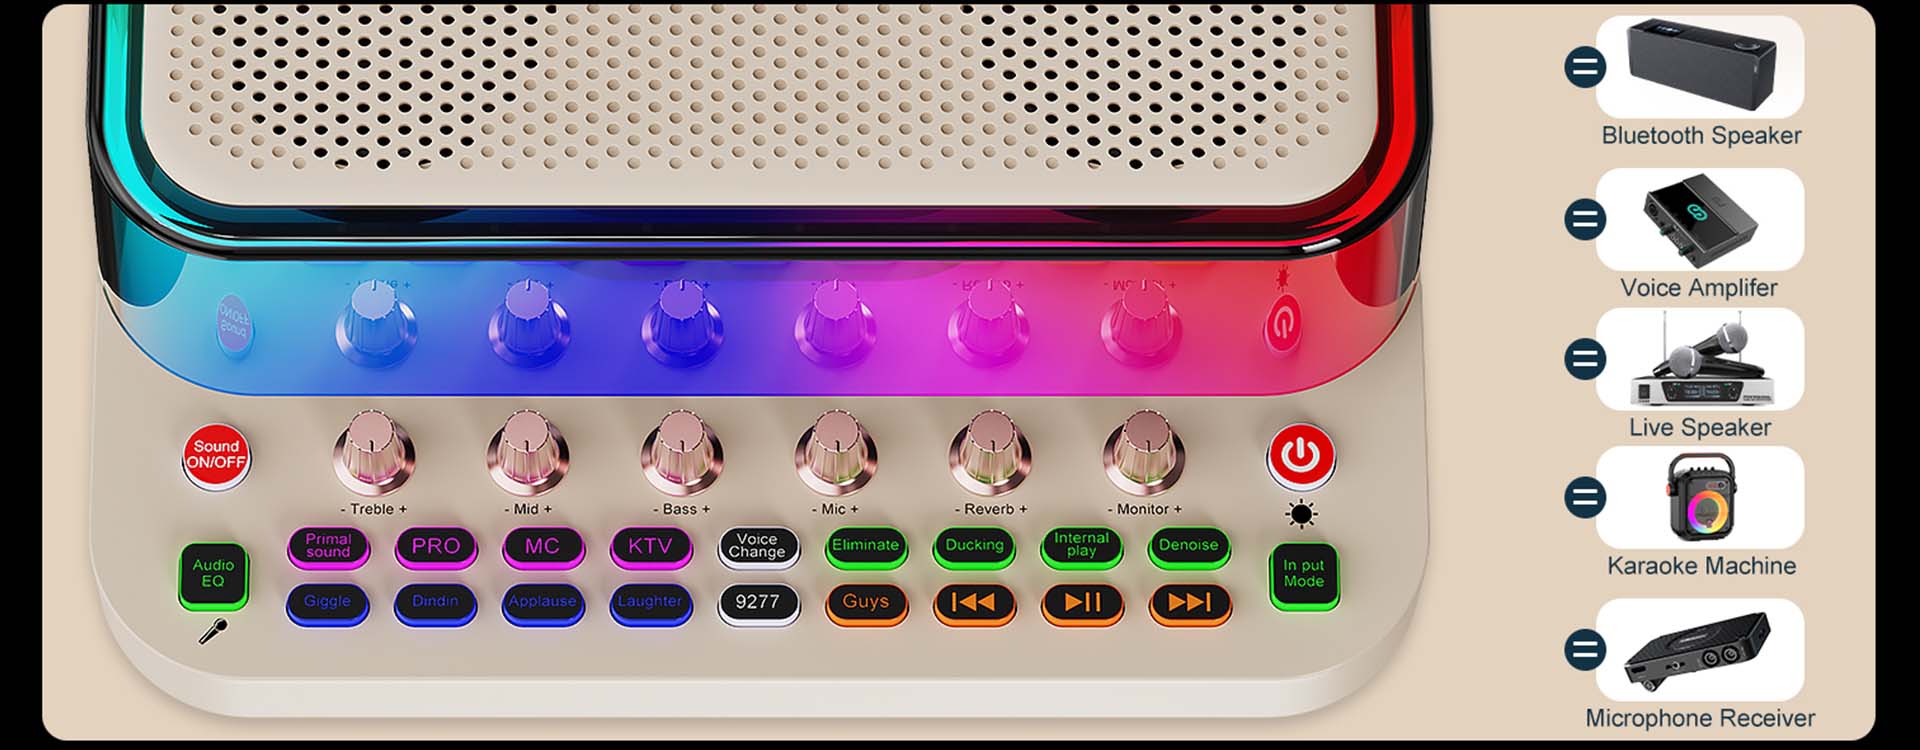 JYX S1 live sound card karaoke machine. Functions equivalent to Bluetooth speaker, voice amplifier, live speaker, karaoke machine, microphone receiver.